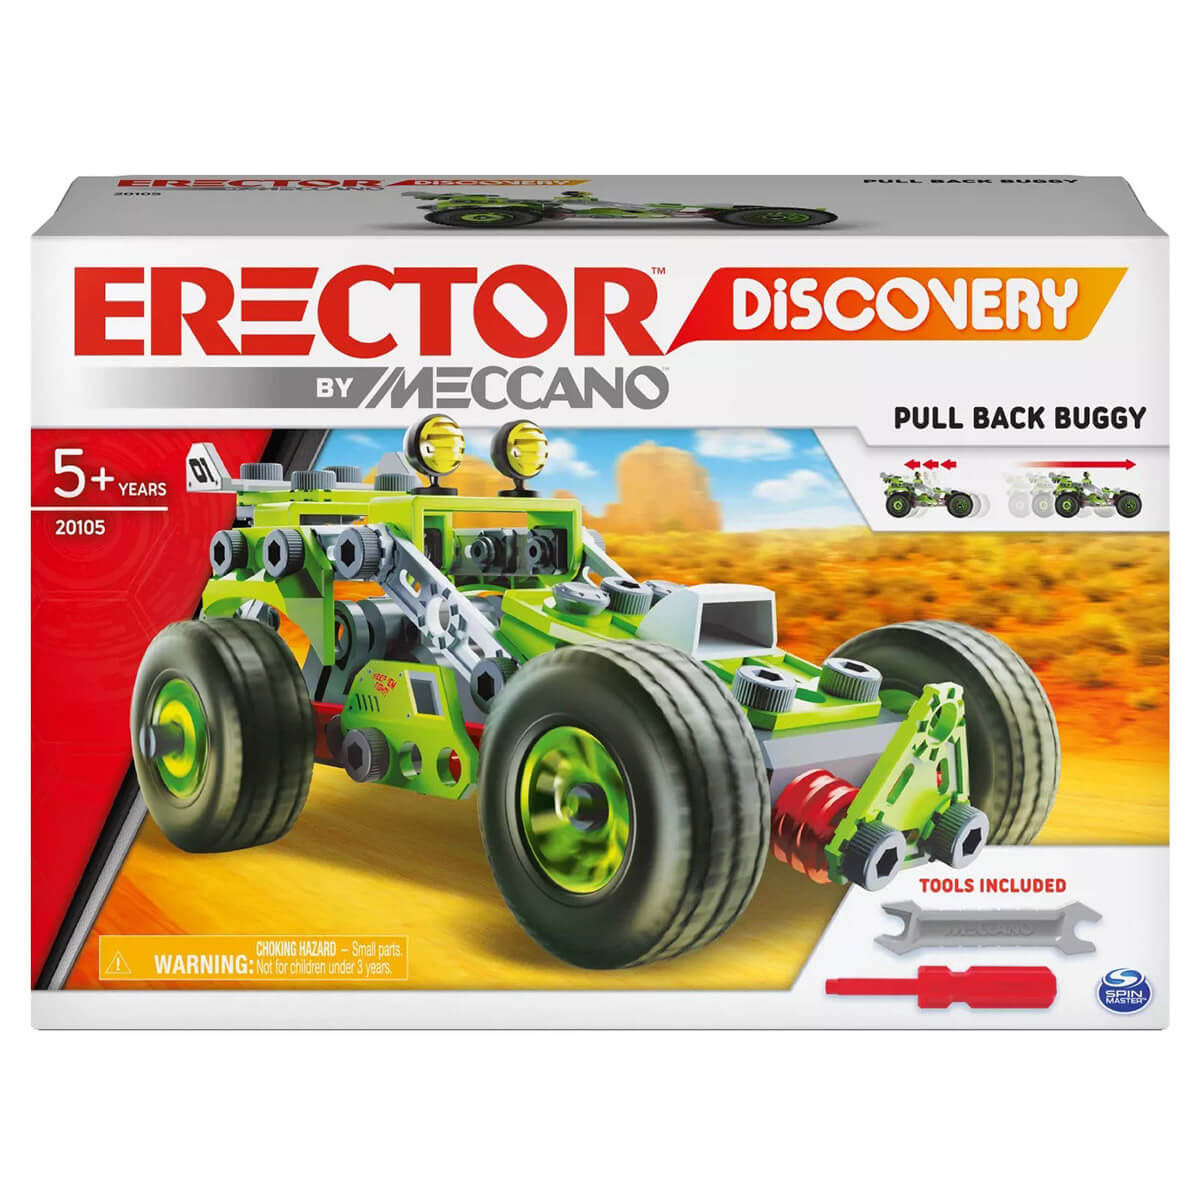 Erector by Meccano Discovery 3-in-1 Deluxe Pull-Back Buggy STEAM Building Kit